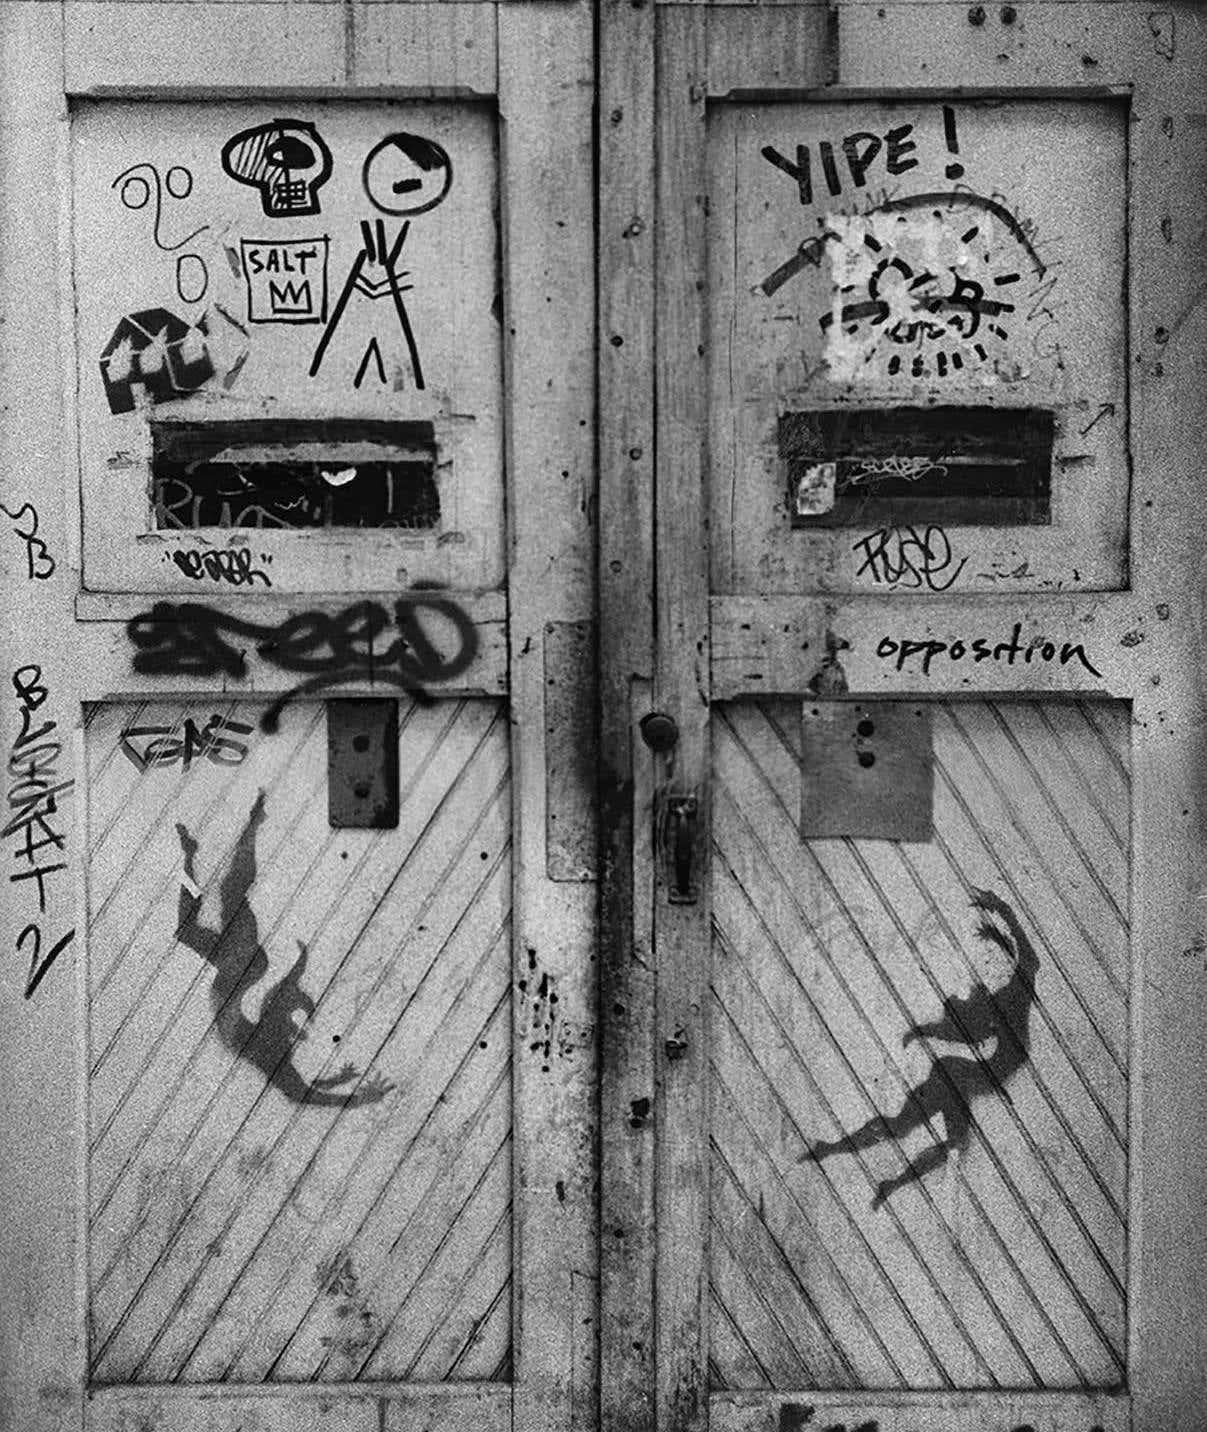 'The Door': Rare early Basquiat, Keith Haring Street Art Photo by Fernando Natalici:

'The Door,' photographed, New York c.1979/1980, represents one of only two known photographs featuring the early graffiti work of a young Jean-Michel Basquiat &